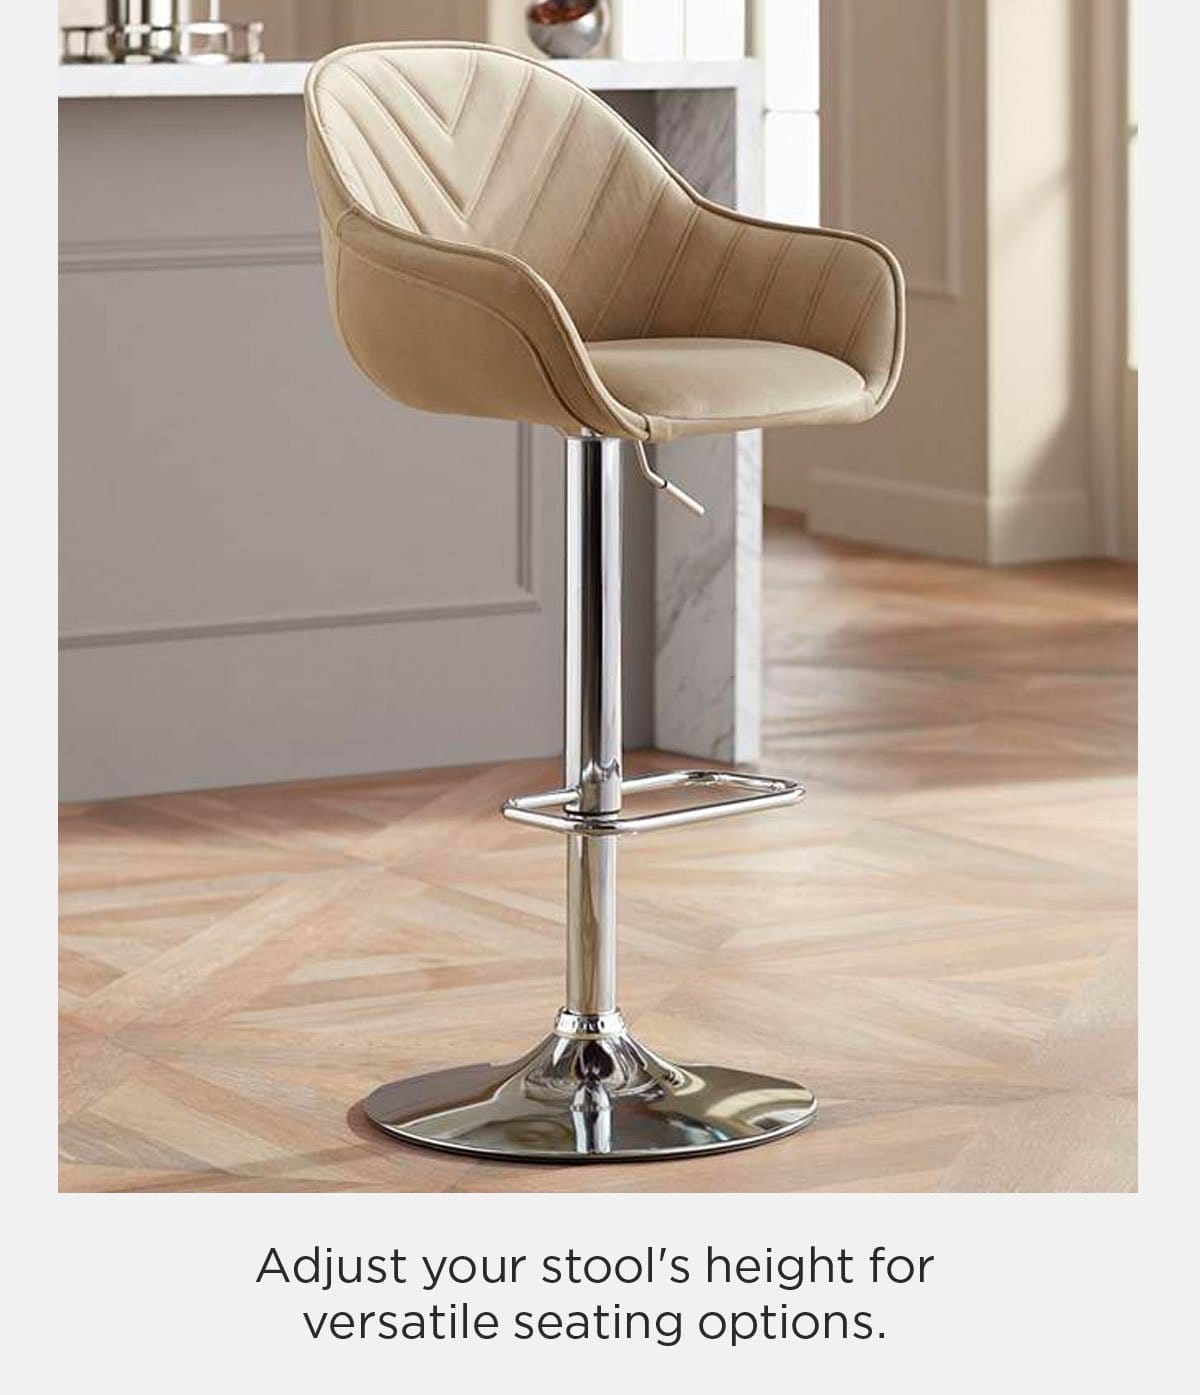 Adjust your stool's height for versatile seating options.